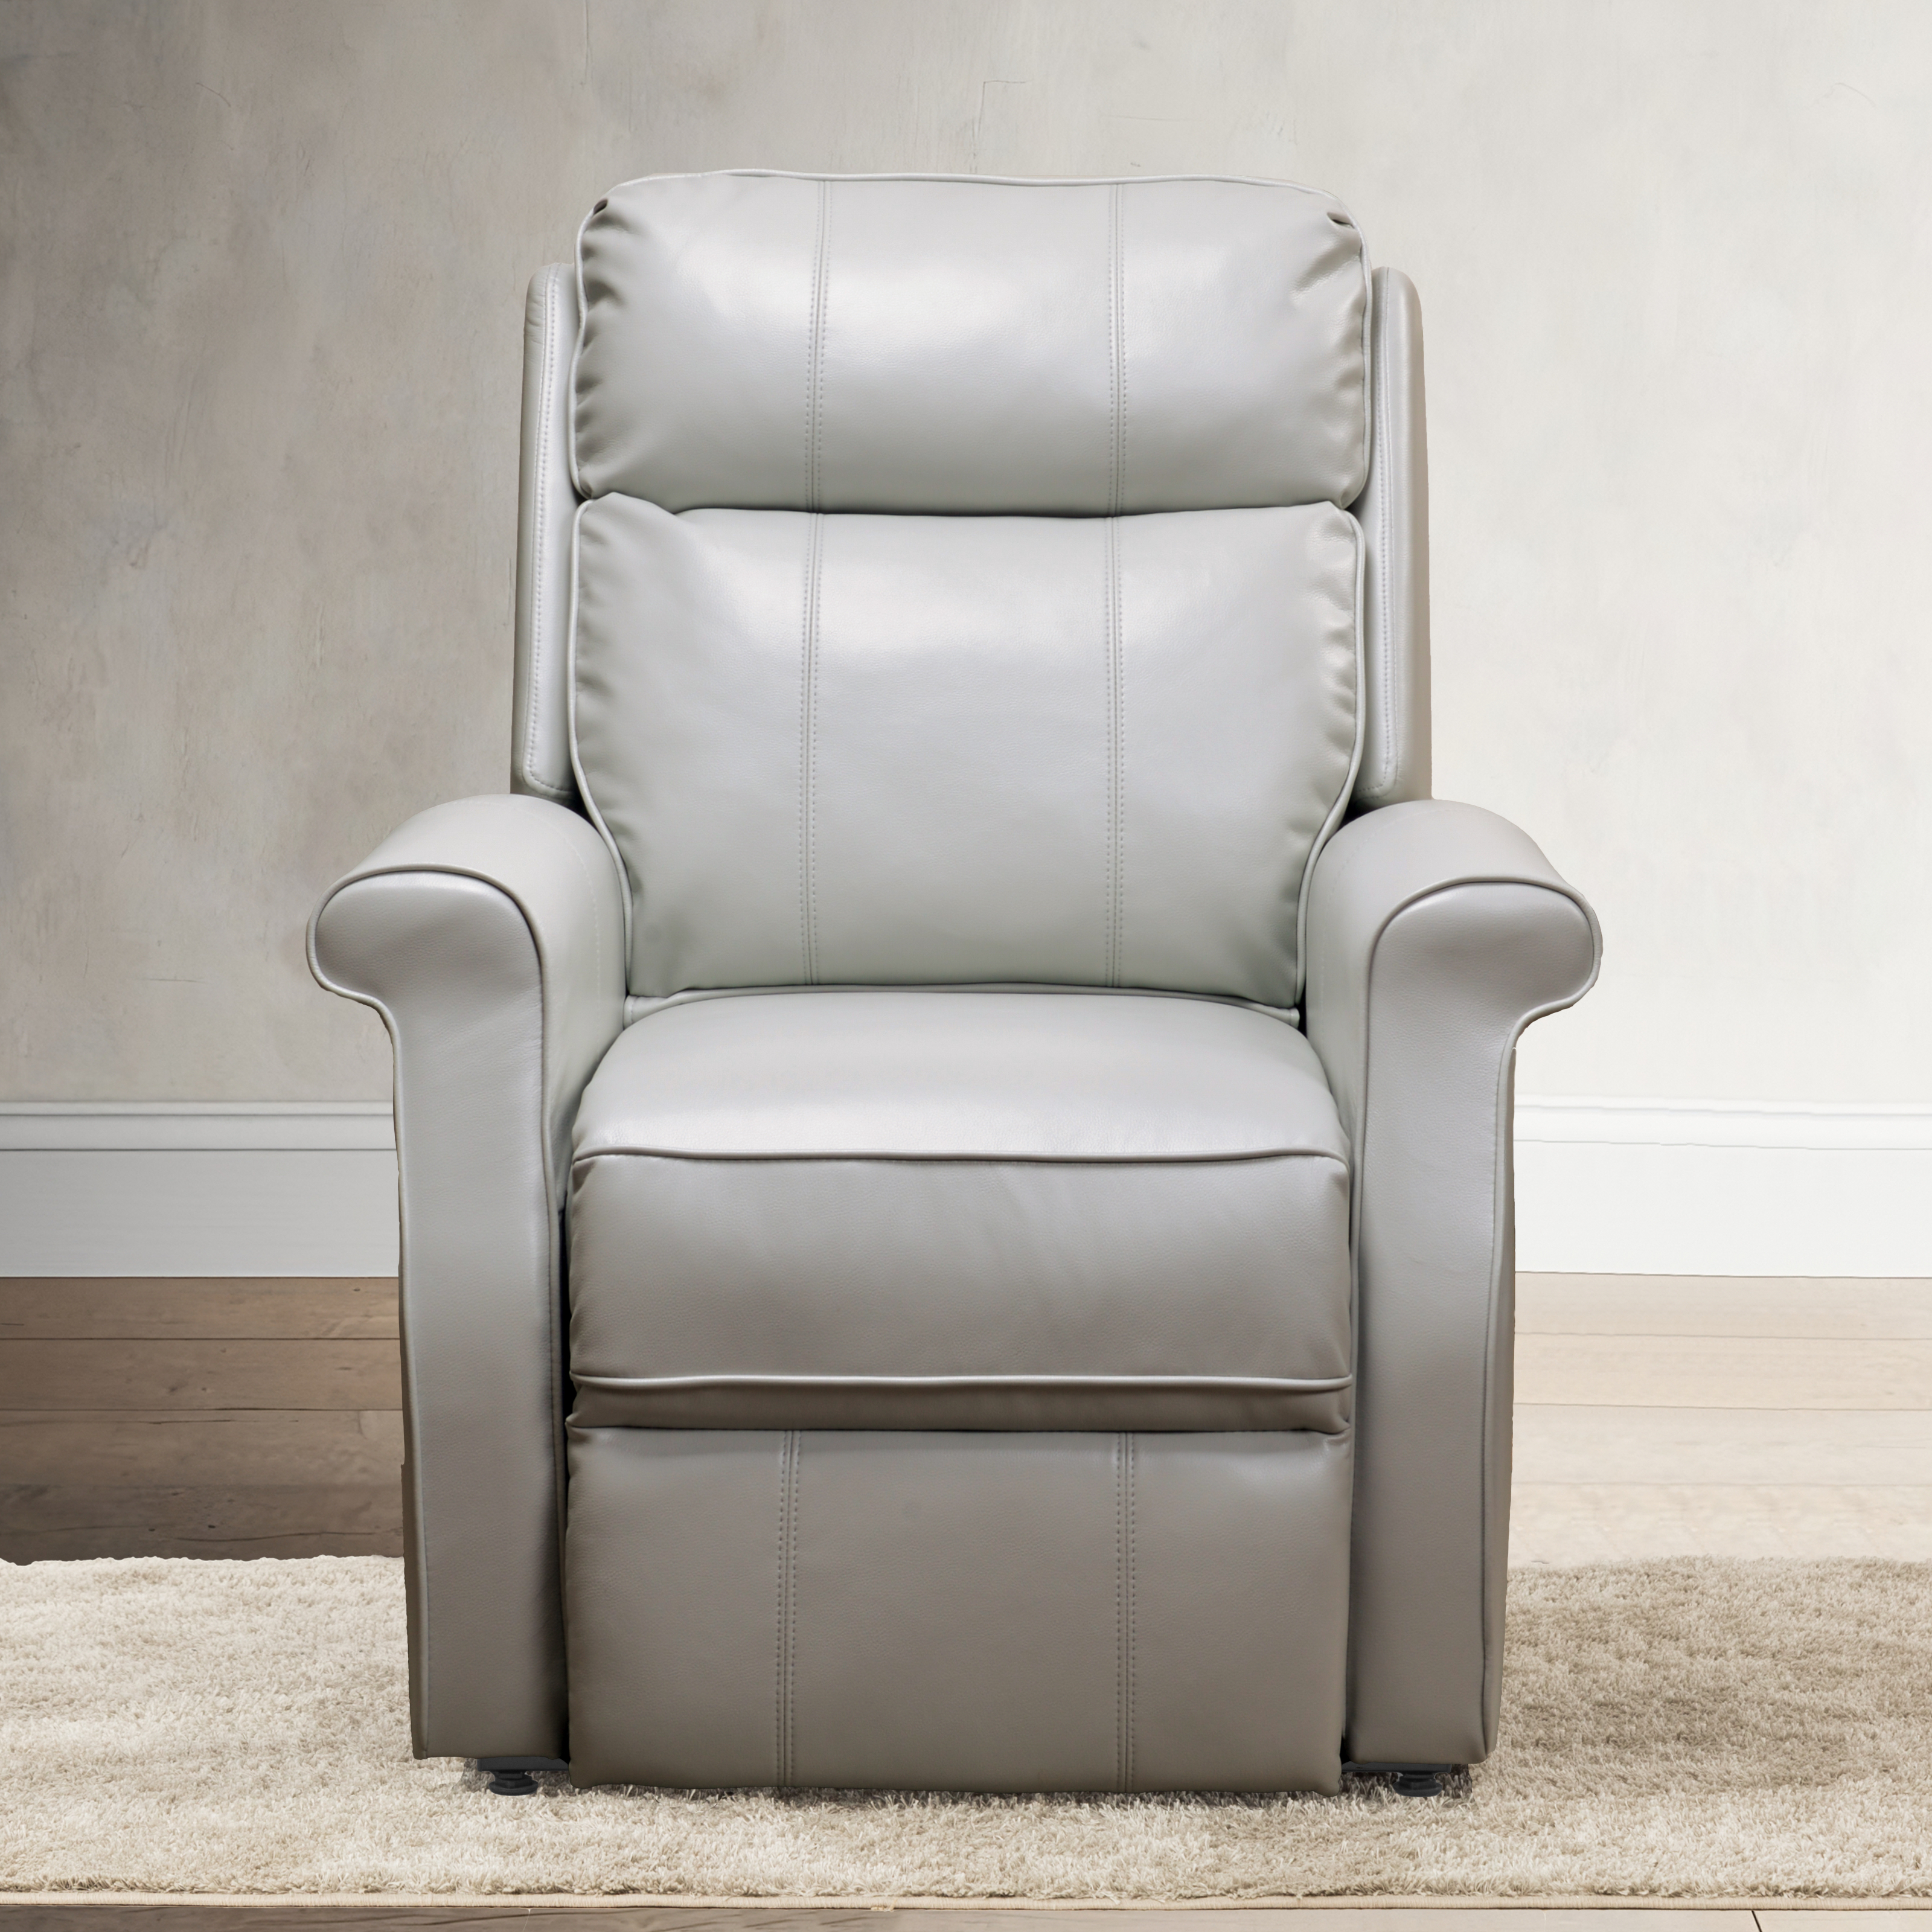 Landis Ivory Traditional Lift Chair